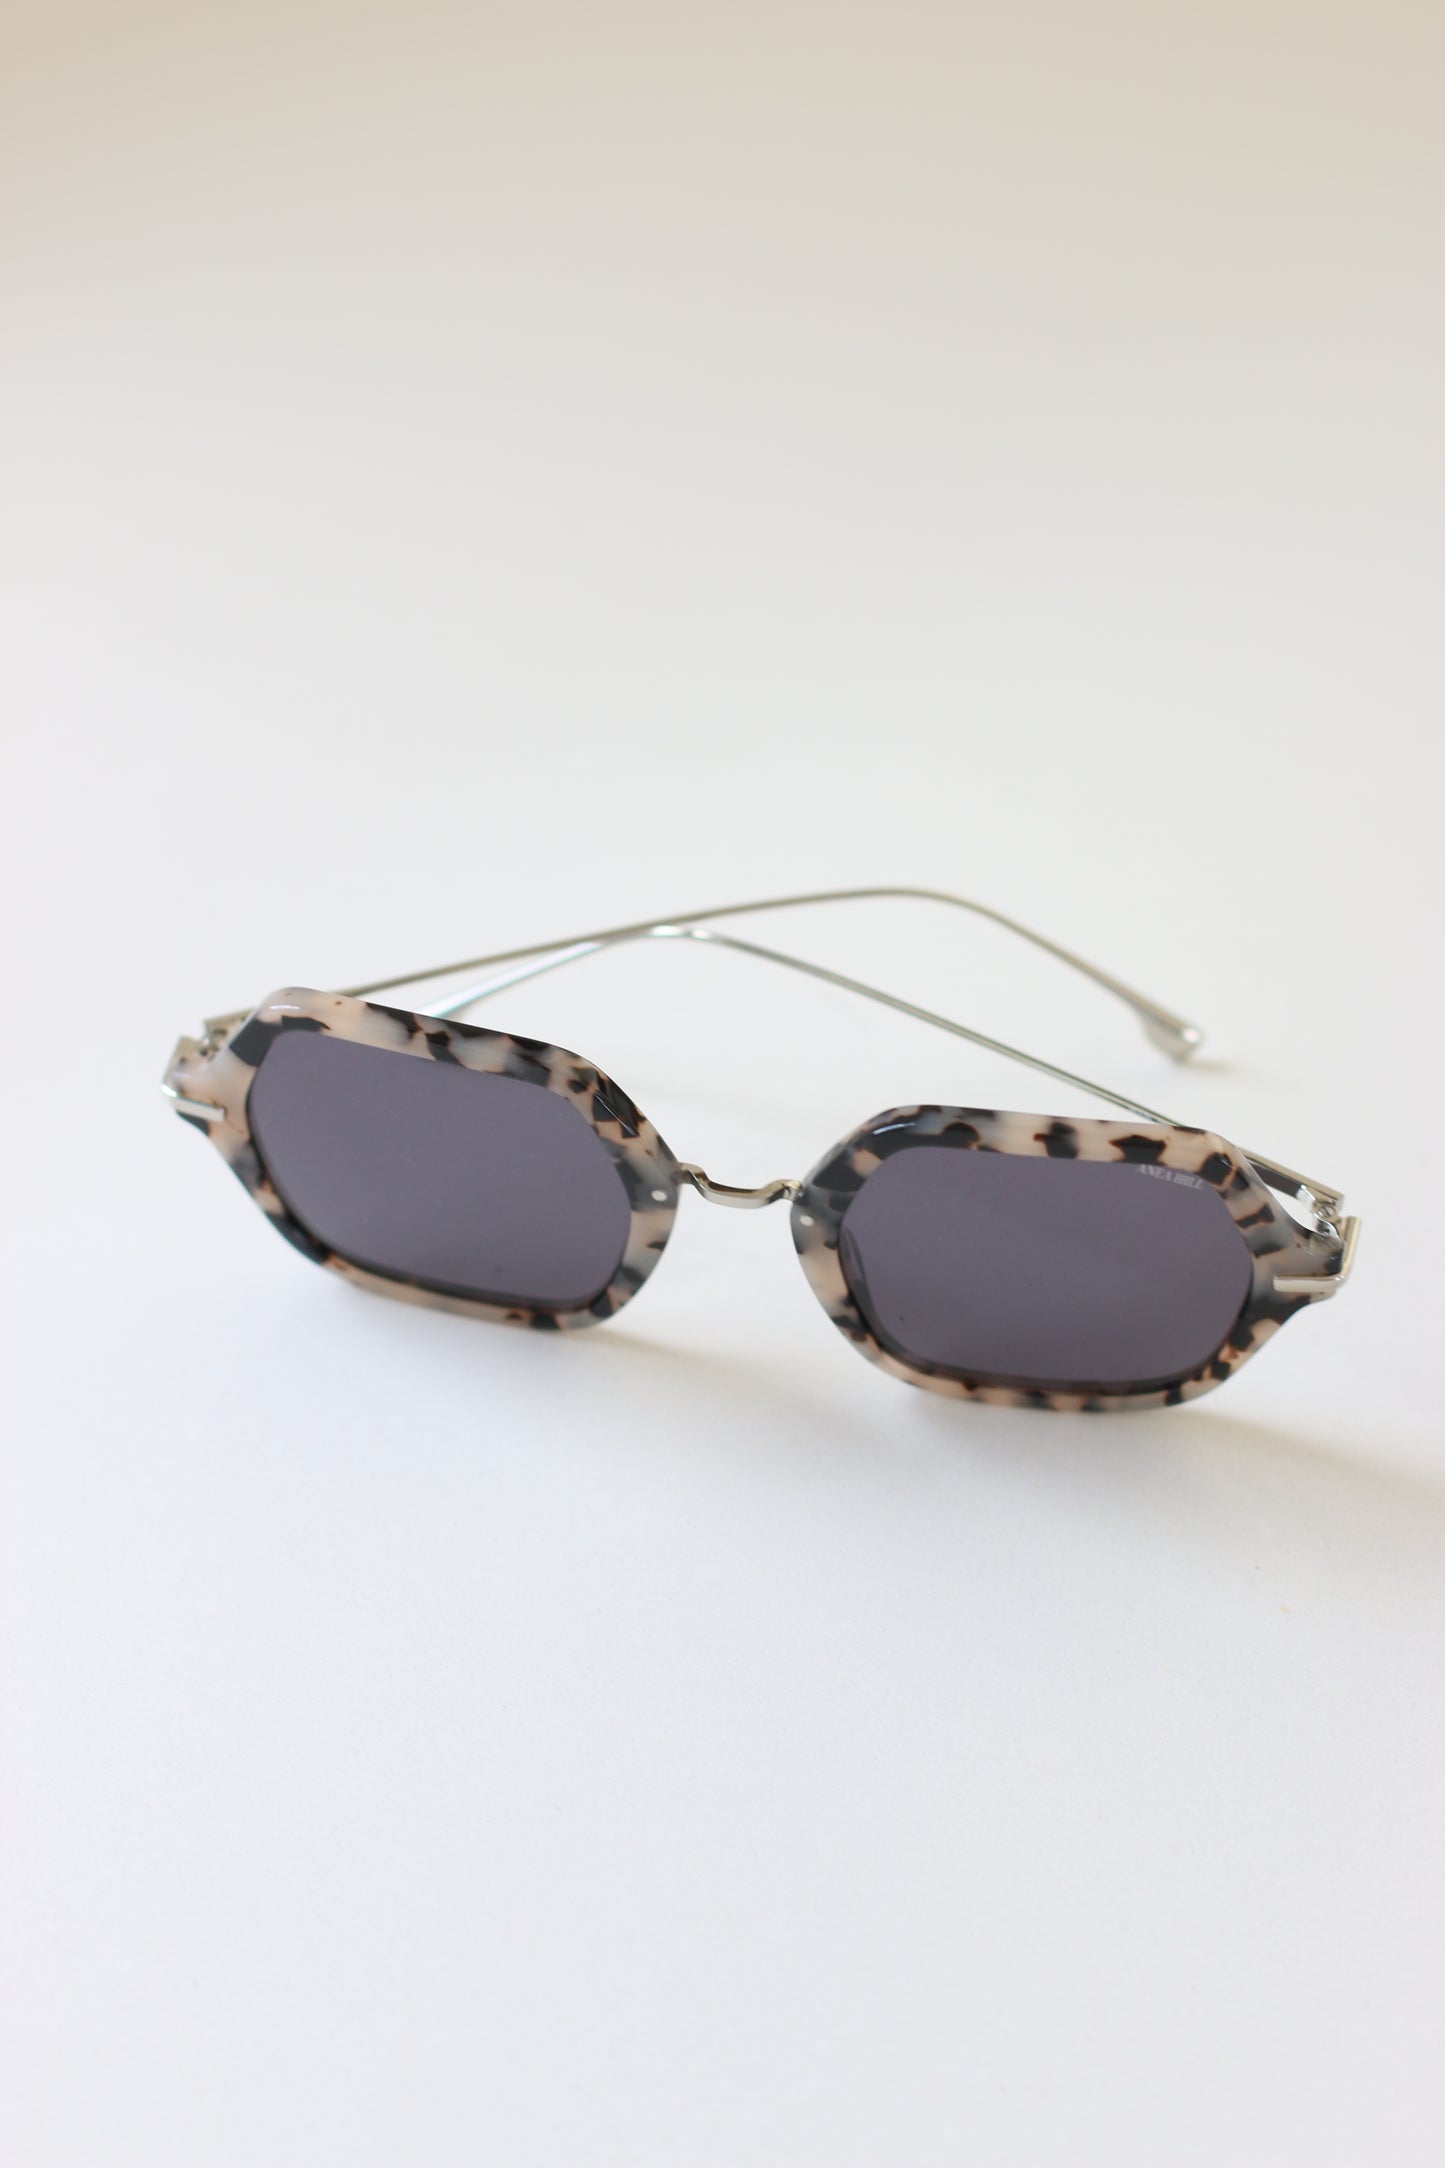 ANEA HILL's collection of luxury sunglasses features a top view of the First Class Sunglasses, revealing their elegant silver-tone accents and dark-gray tinted lenses.